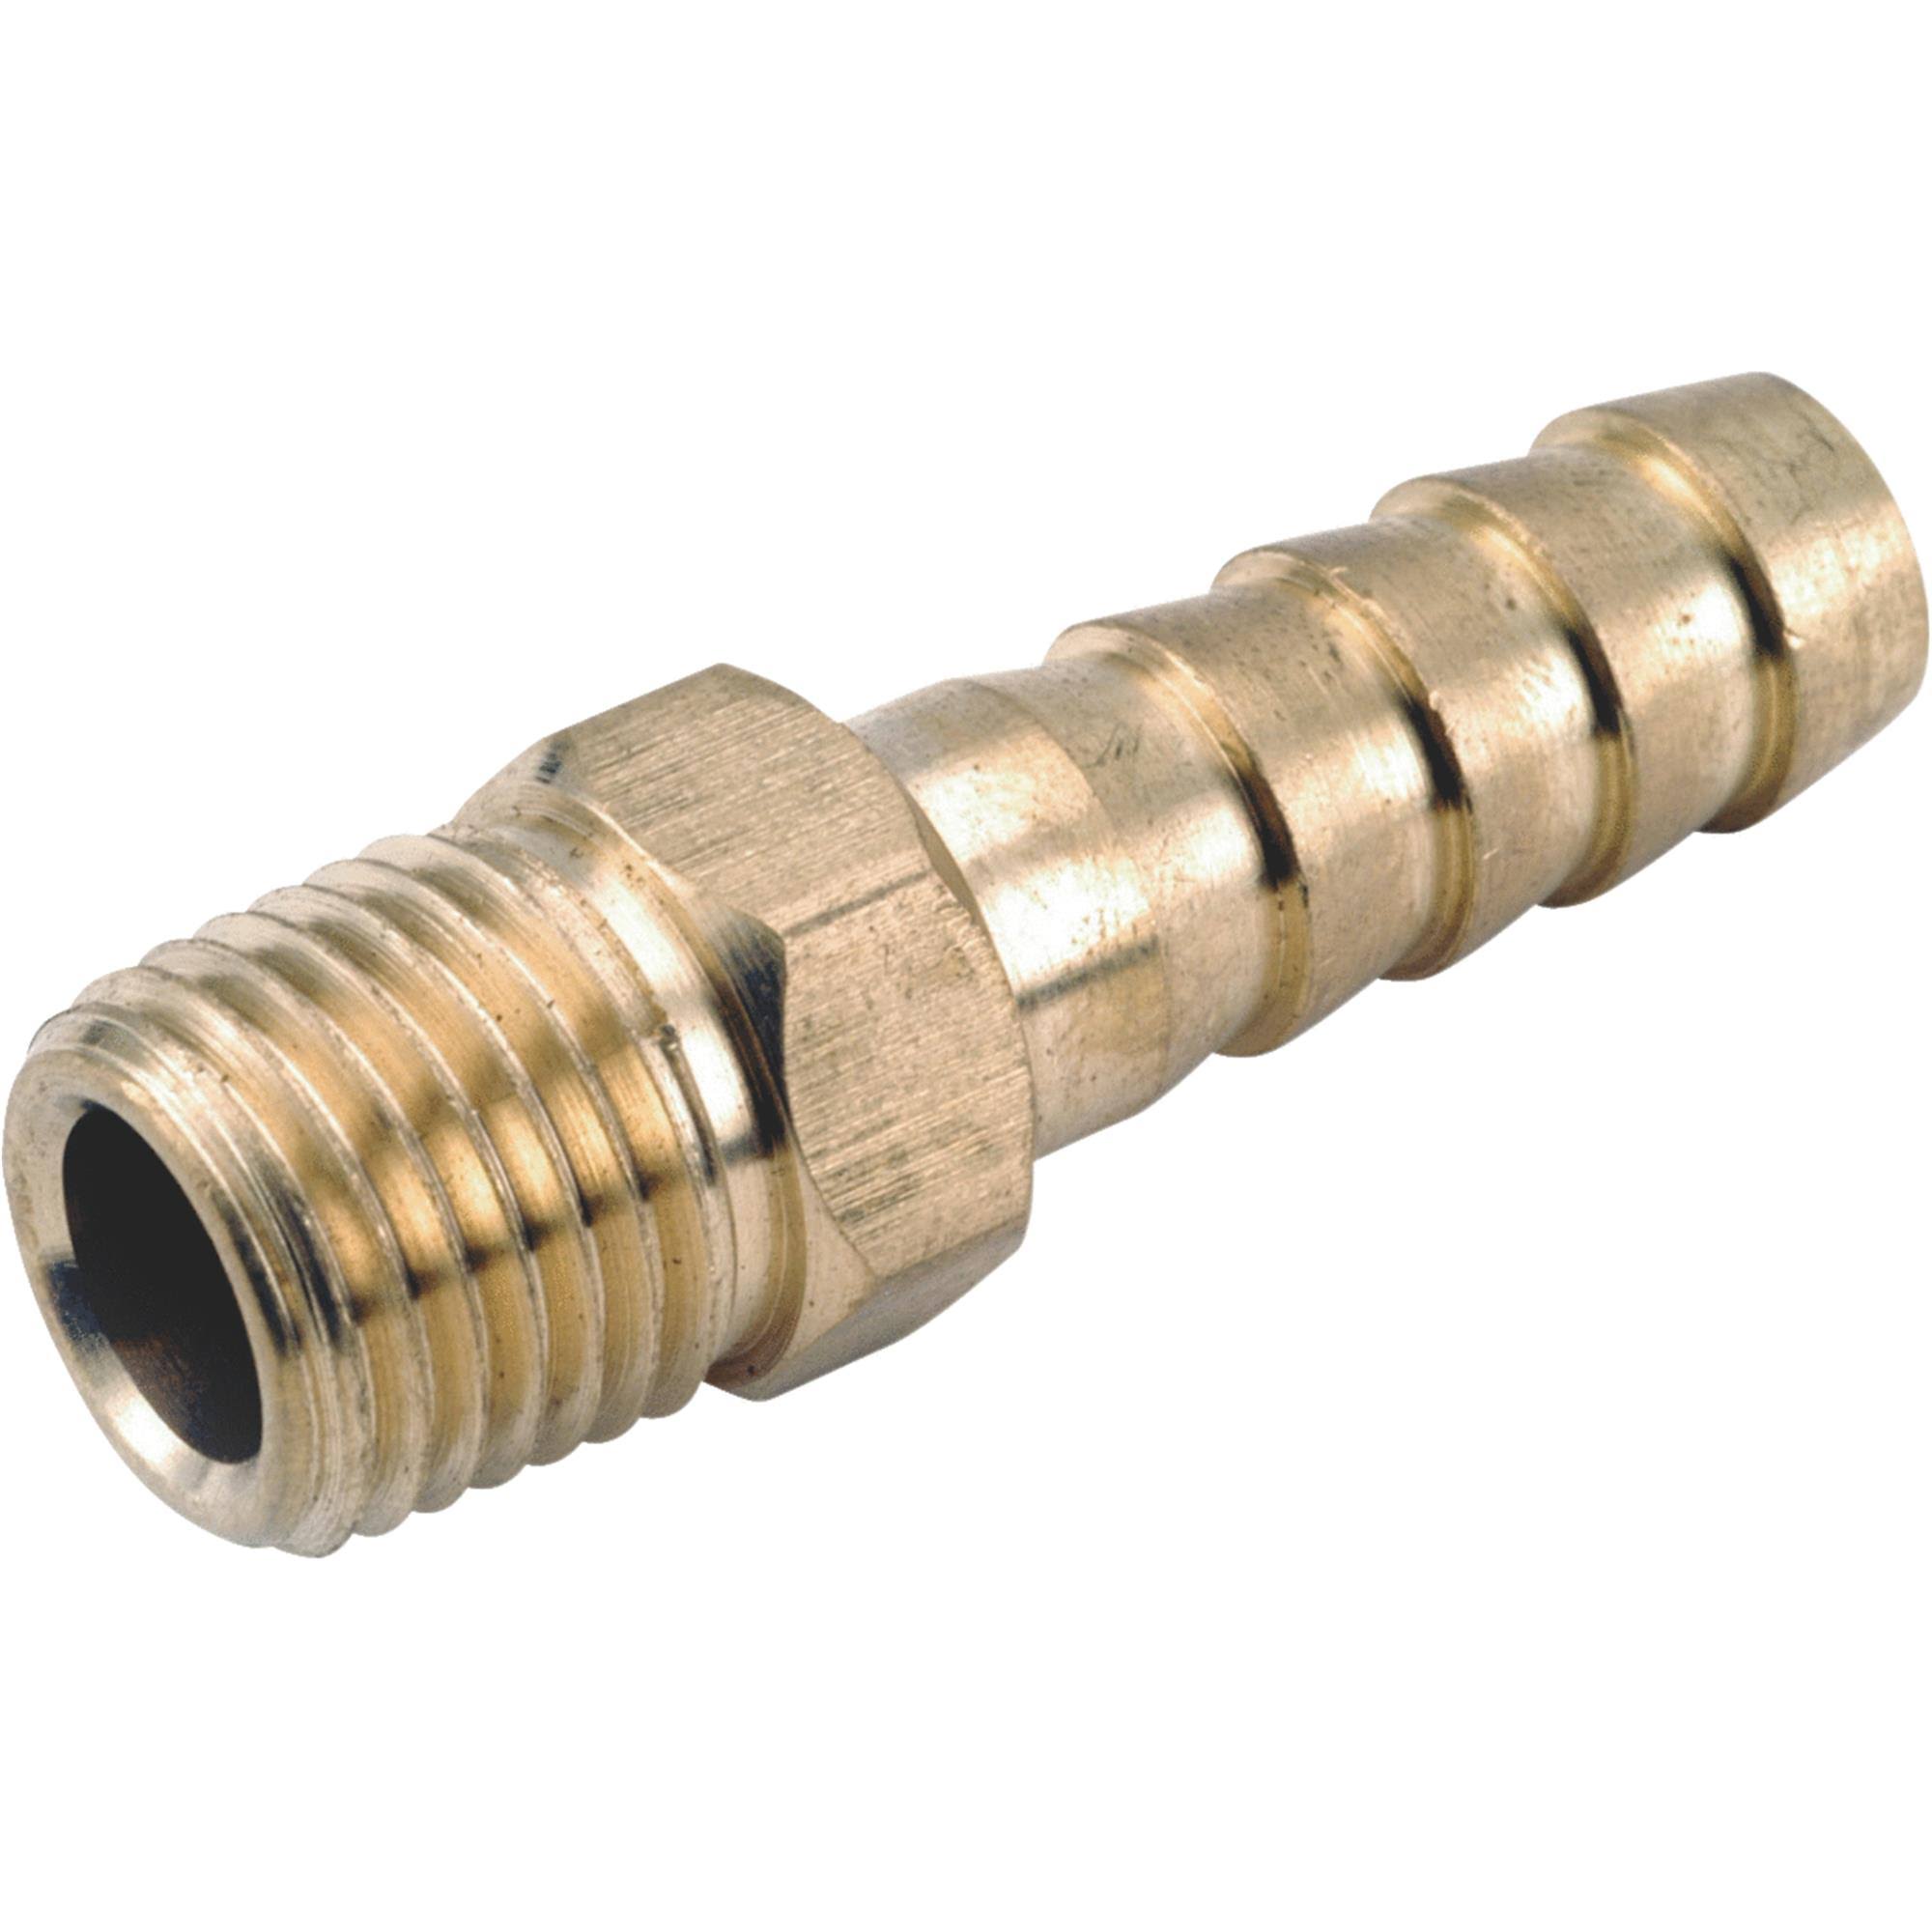 Anderson Metals Corp Male Pipe Thread - 3/8"